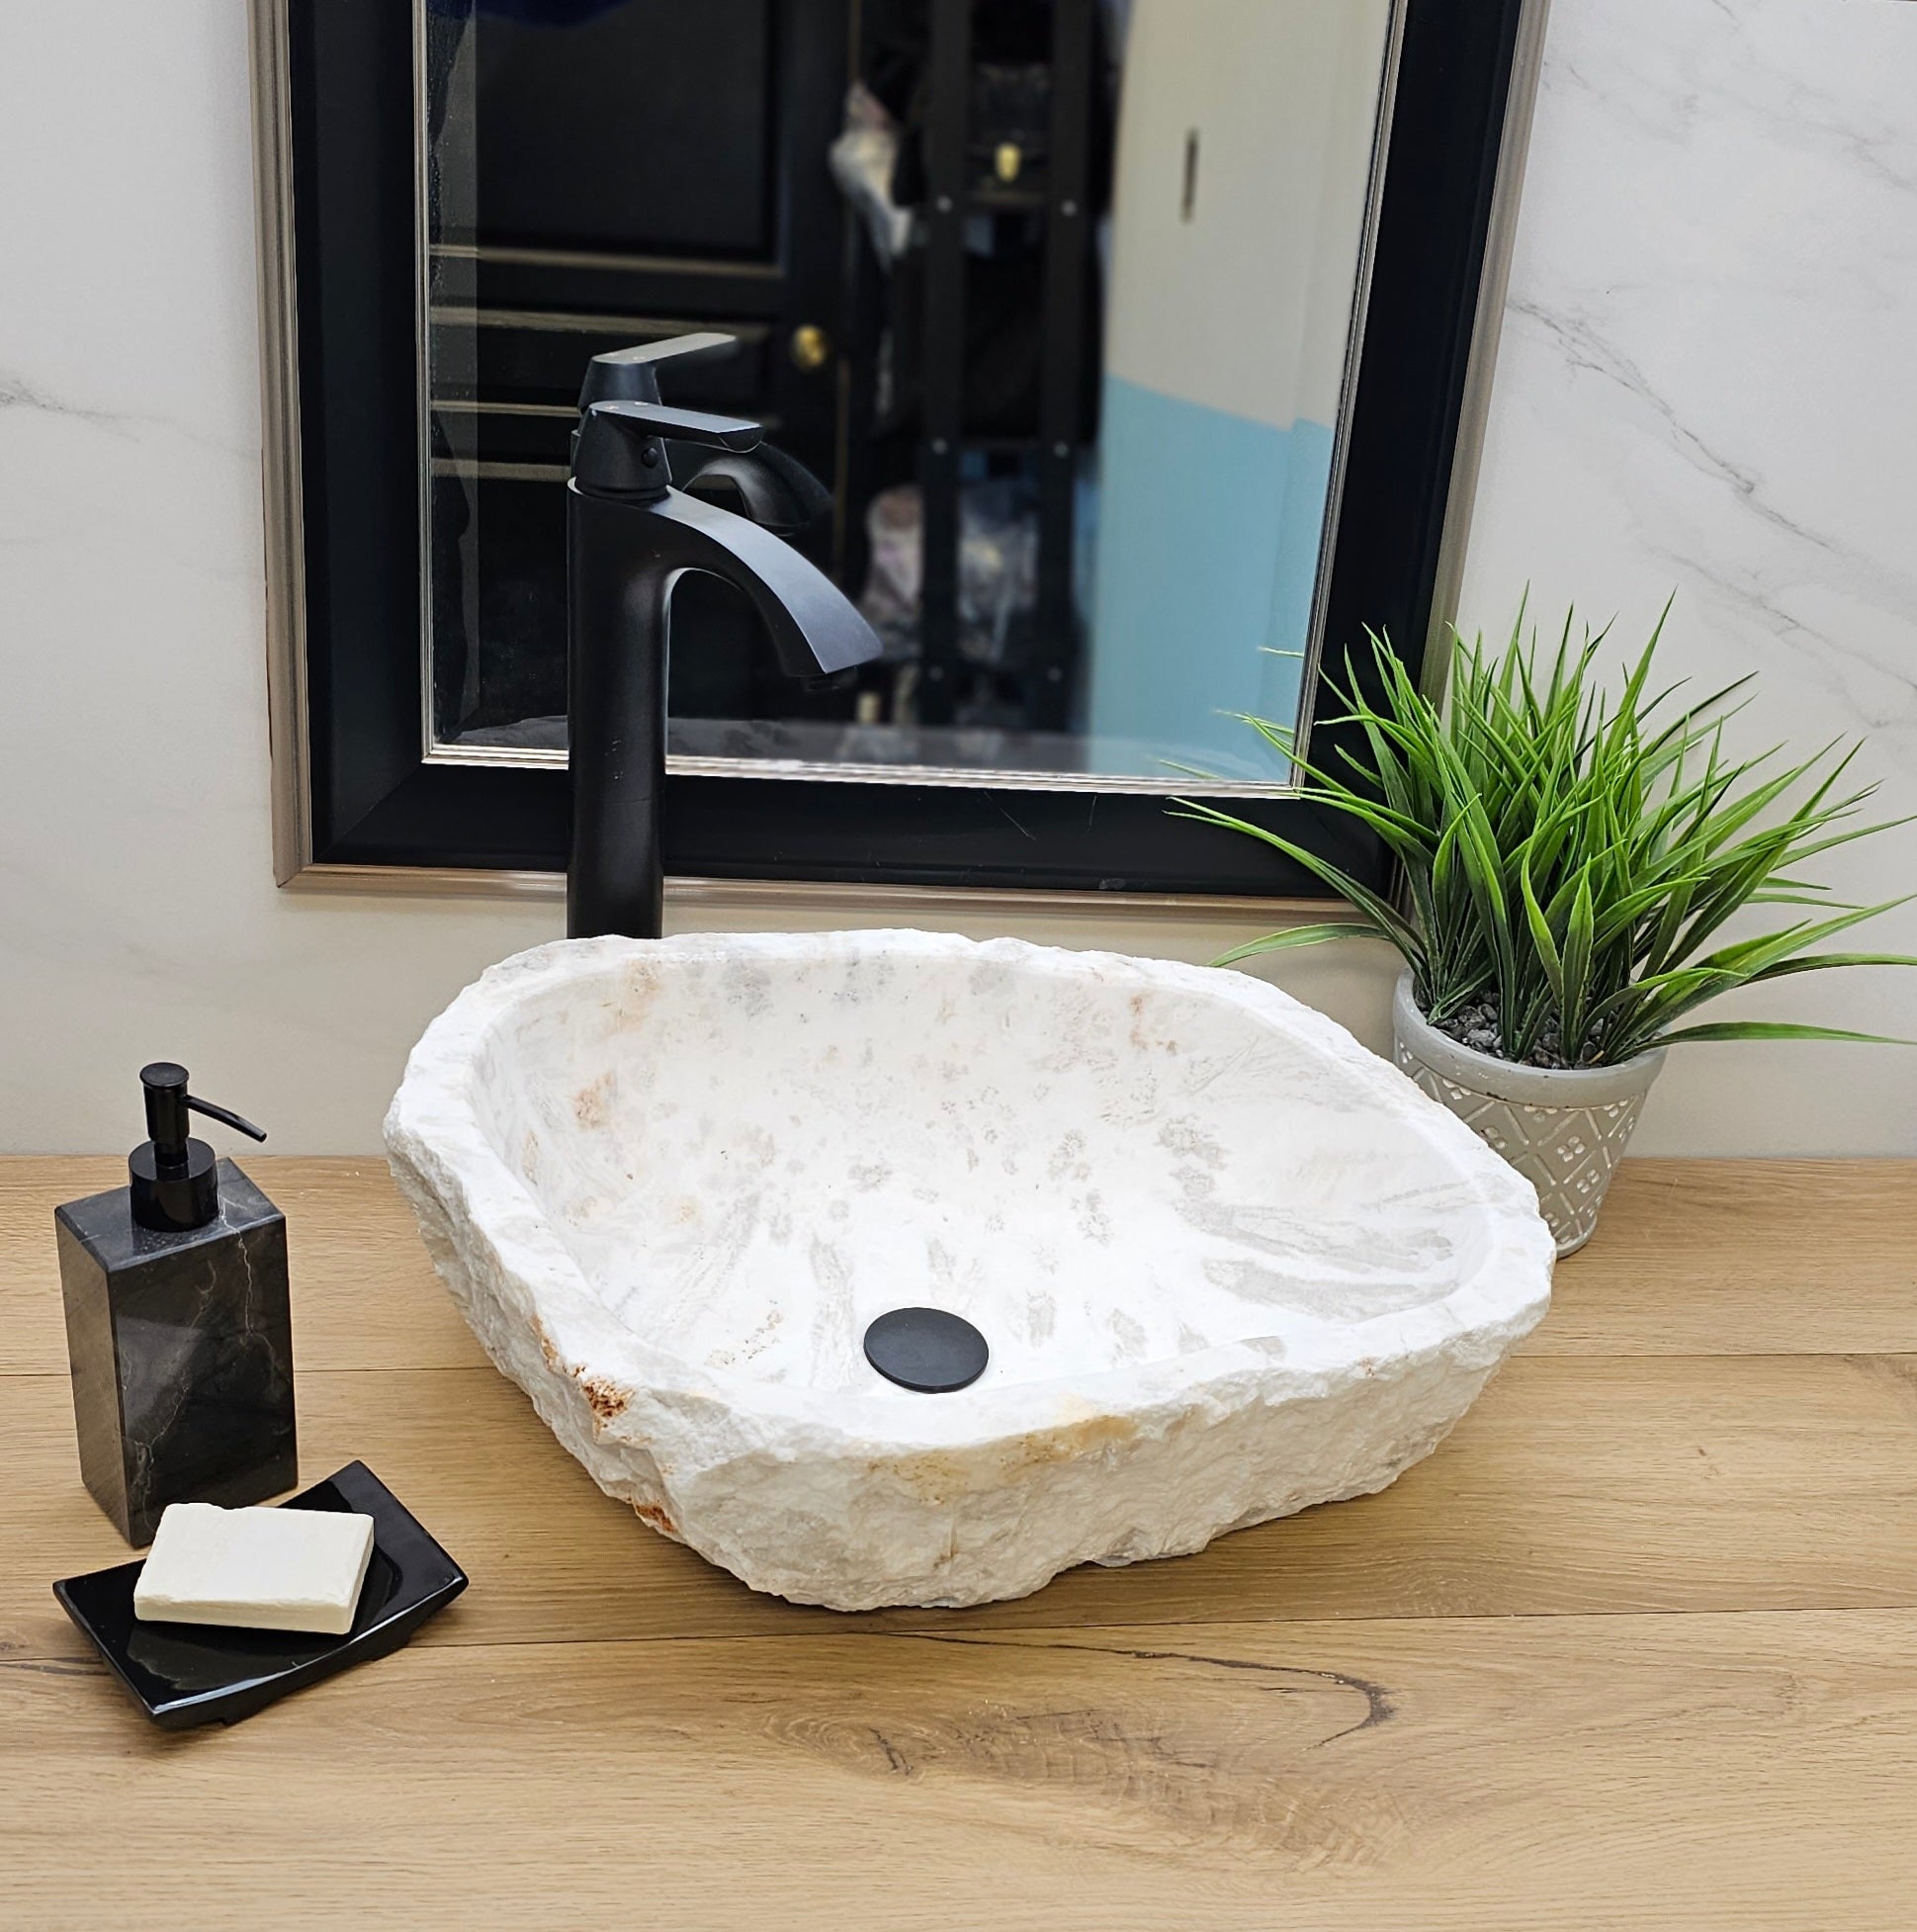 White and Gray Onyx Vessel Bathroom Sink. A beautiful work of art. We offer fast shipping. Handmade in Mexico. We hand finish, package, and ship from the USA. Buy now at www.felipeandgrace.com. 